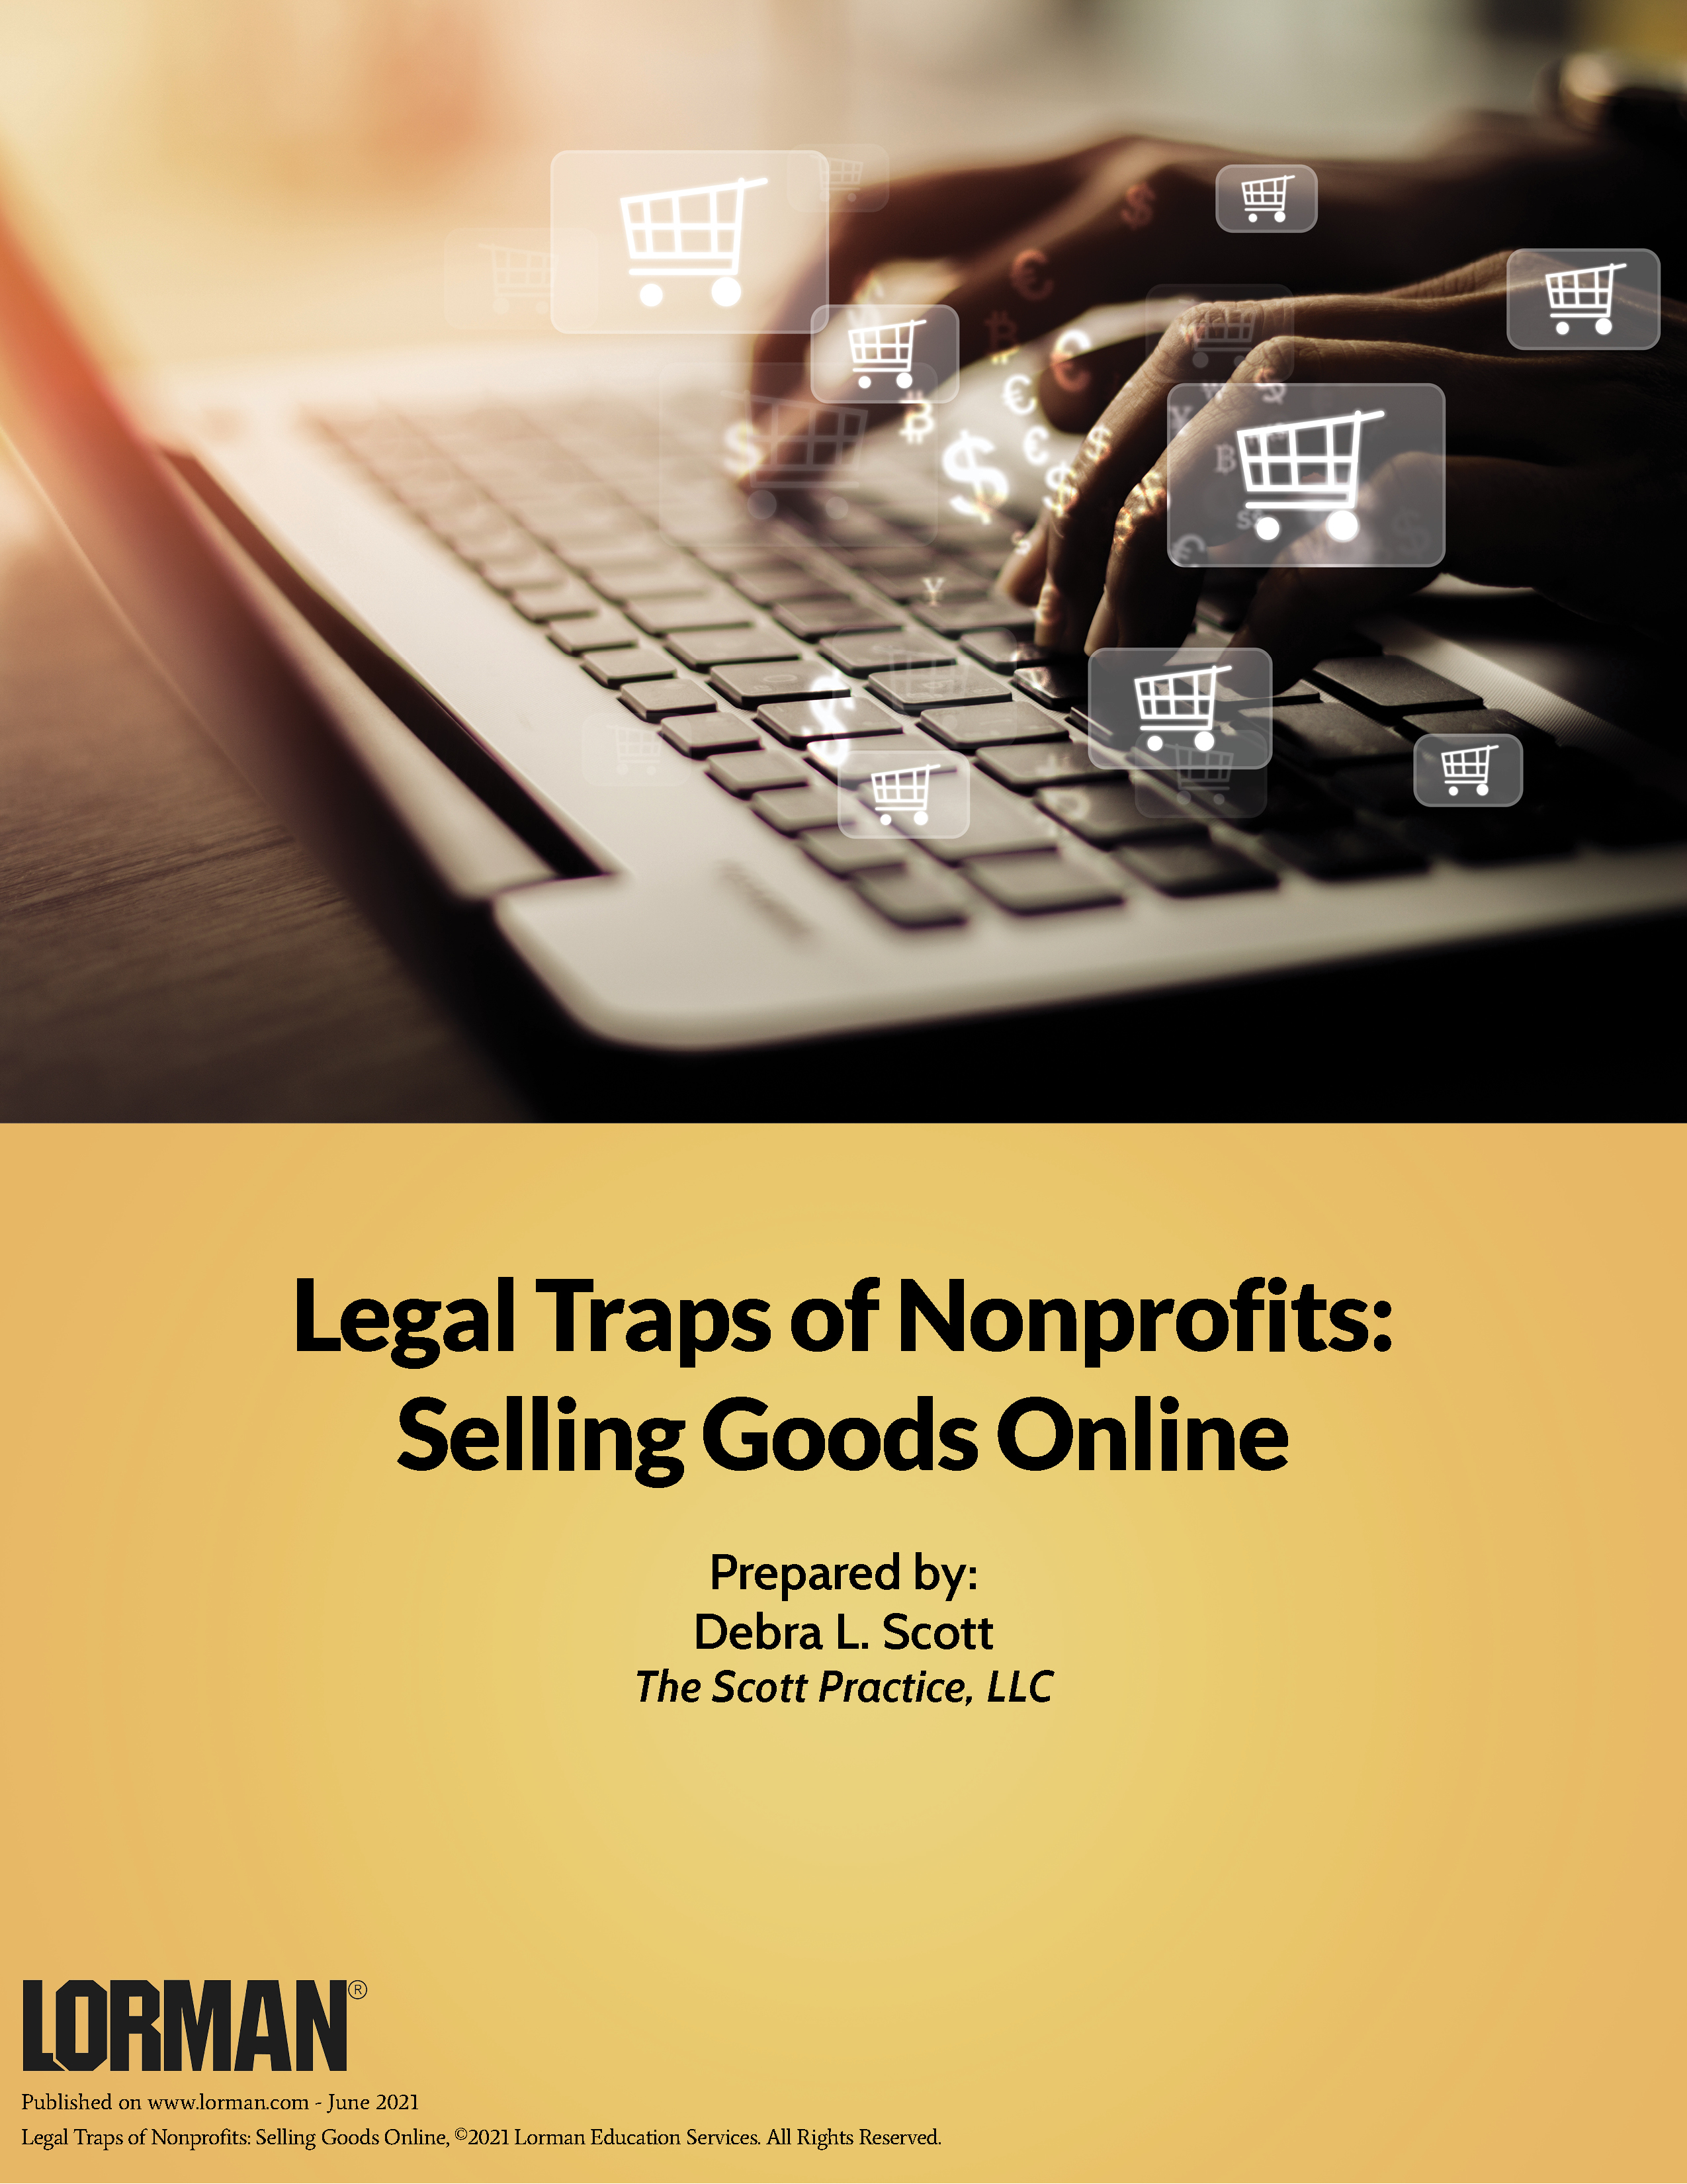 Legal Traps of Nonprofits: Selling Goods Online